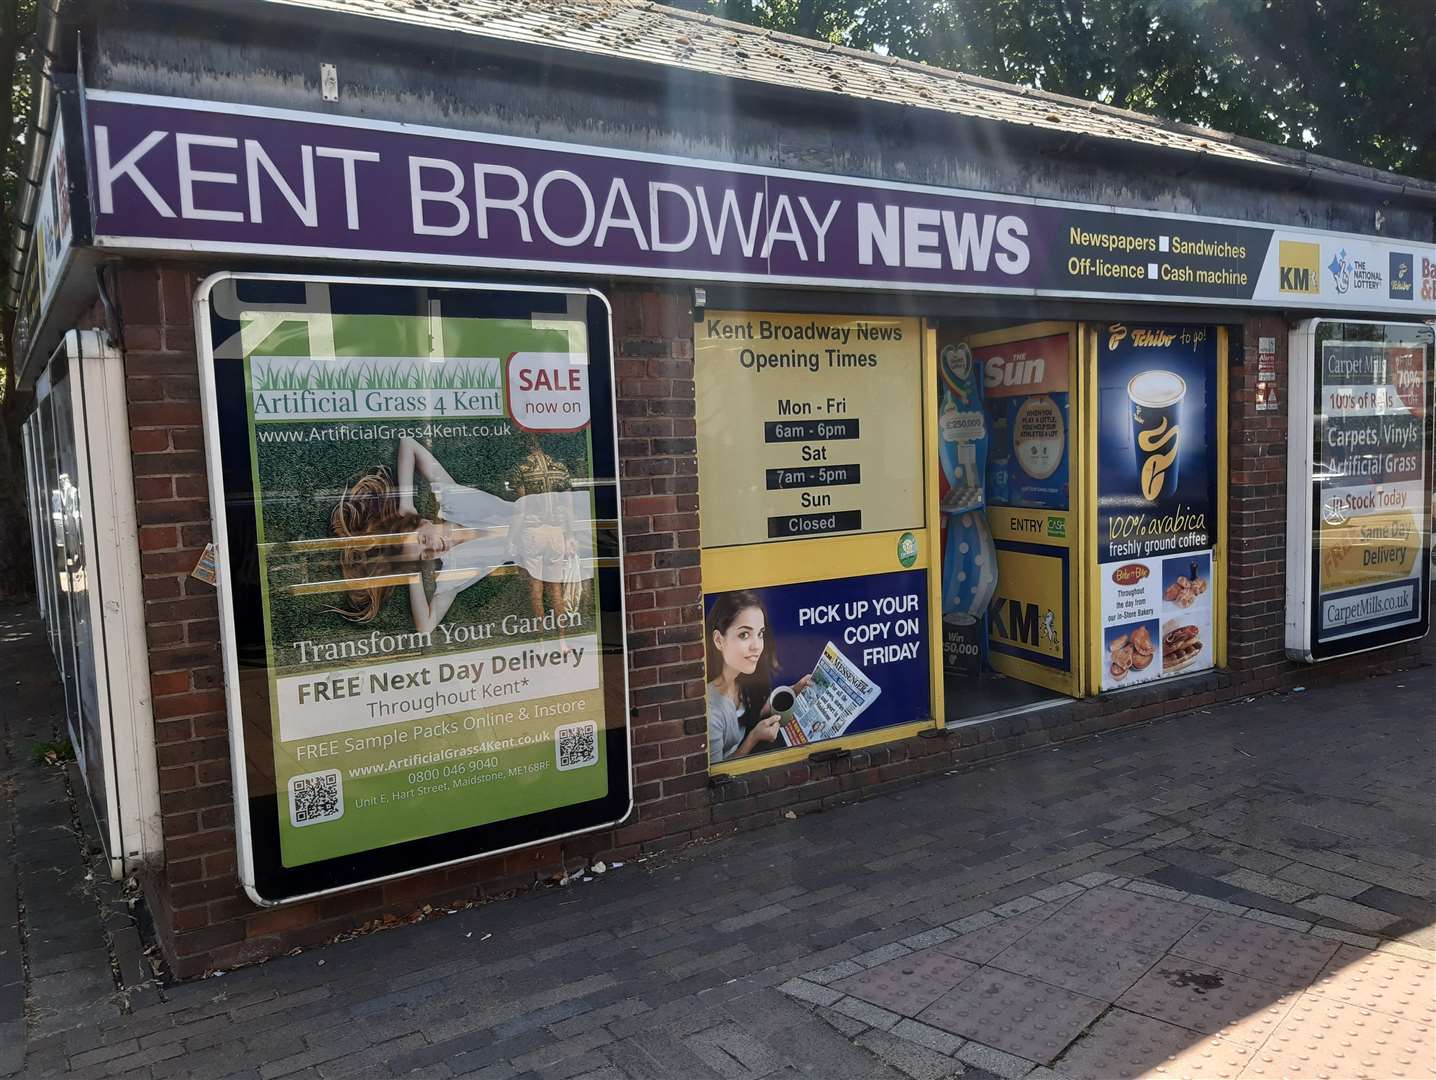 Kent Broadway News: the kiosk is in the way